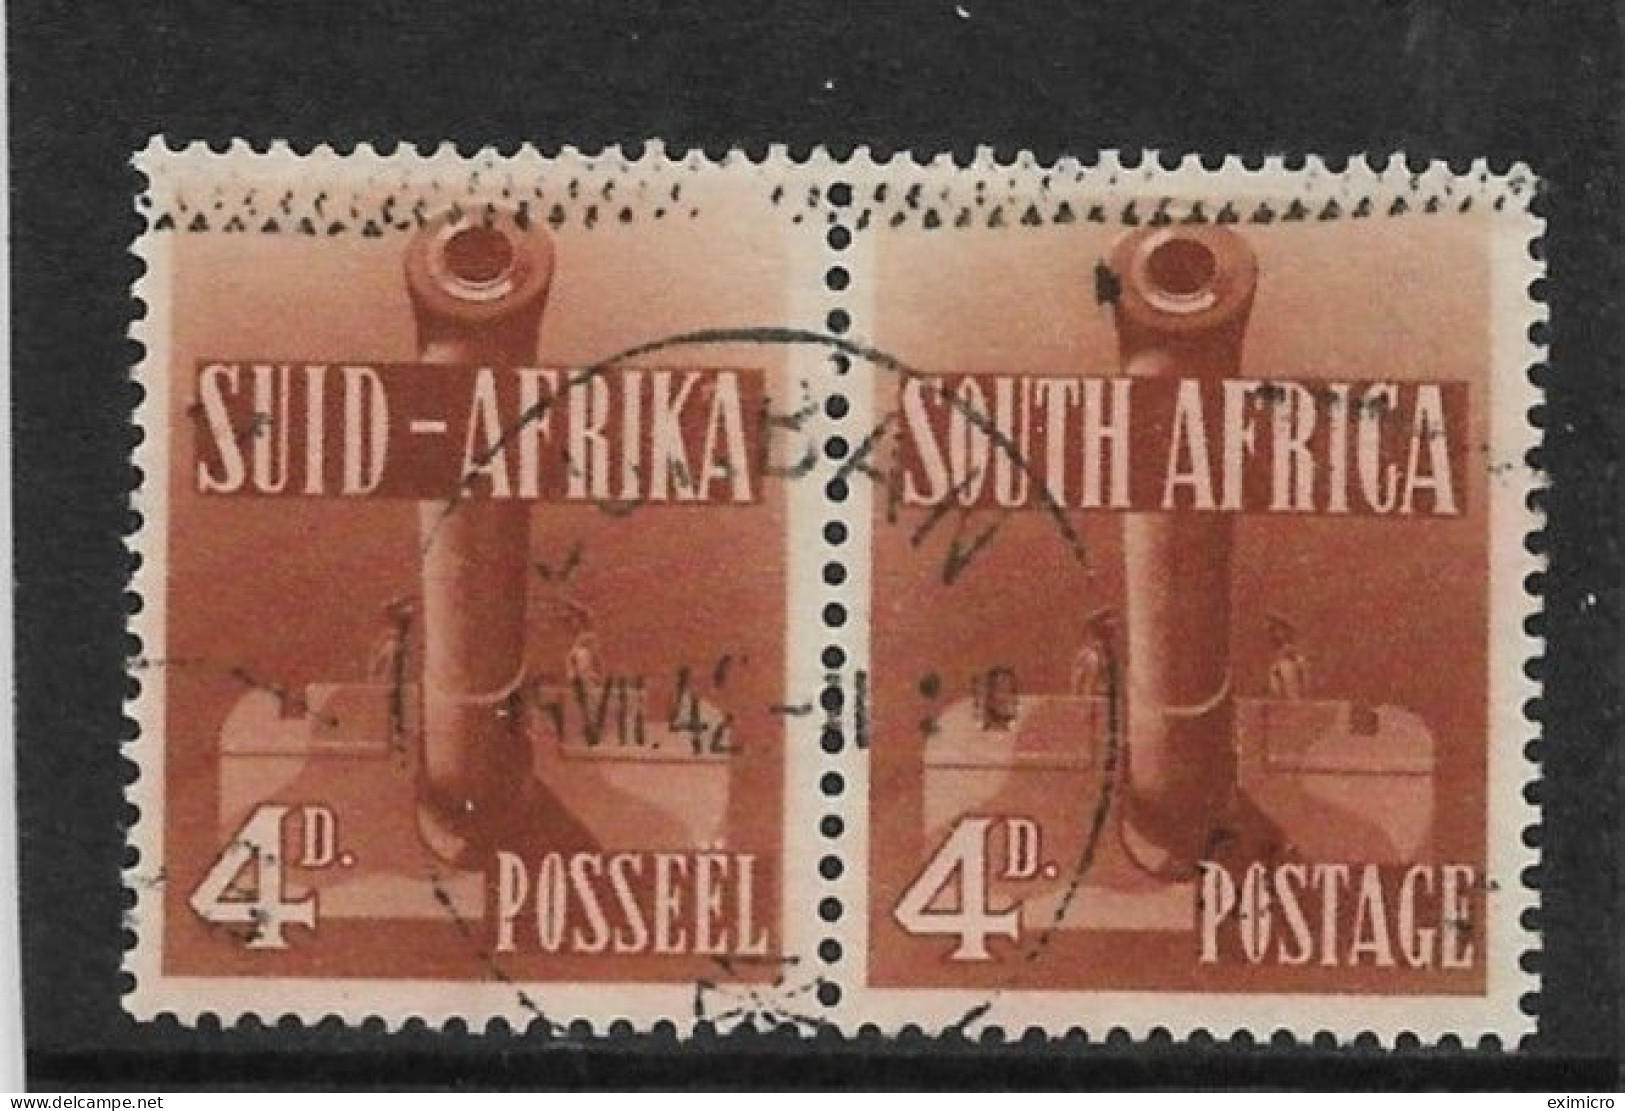 SOUTH AFRICA 1941 4d ORANGE-BROWN SG 92 FINE USED Cat £35 - Used Stamps